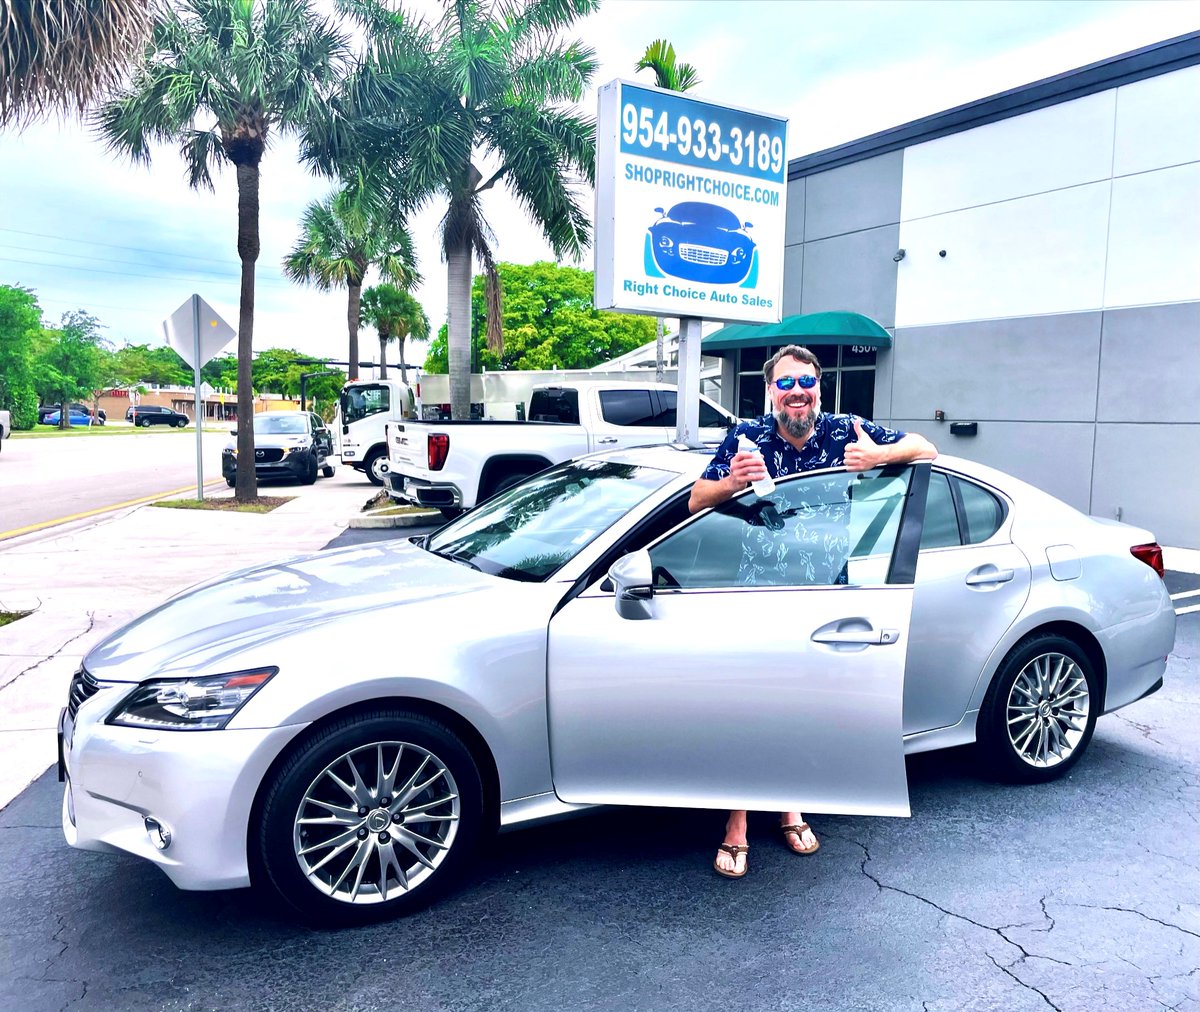 Happy customer driving back to Wisconsin in this 2014 #Lexus GS350 AWD with only 65k miles!  #RightChoiceAutoSales in Pompano Beach, FL has the best used car deals in the country! #LexusGS350 #usedcars #FloridaCars